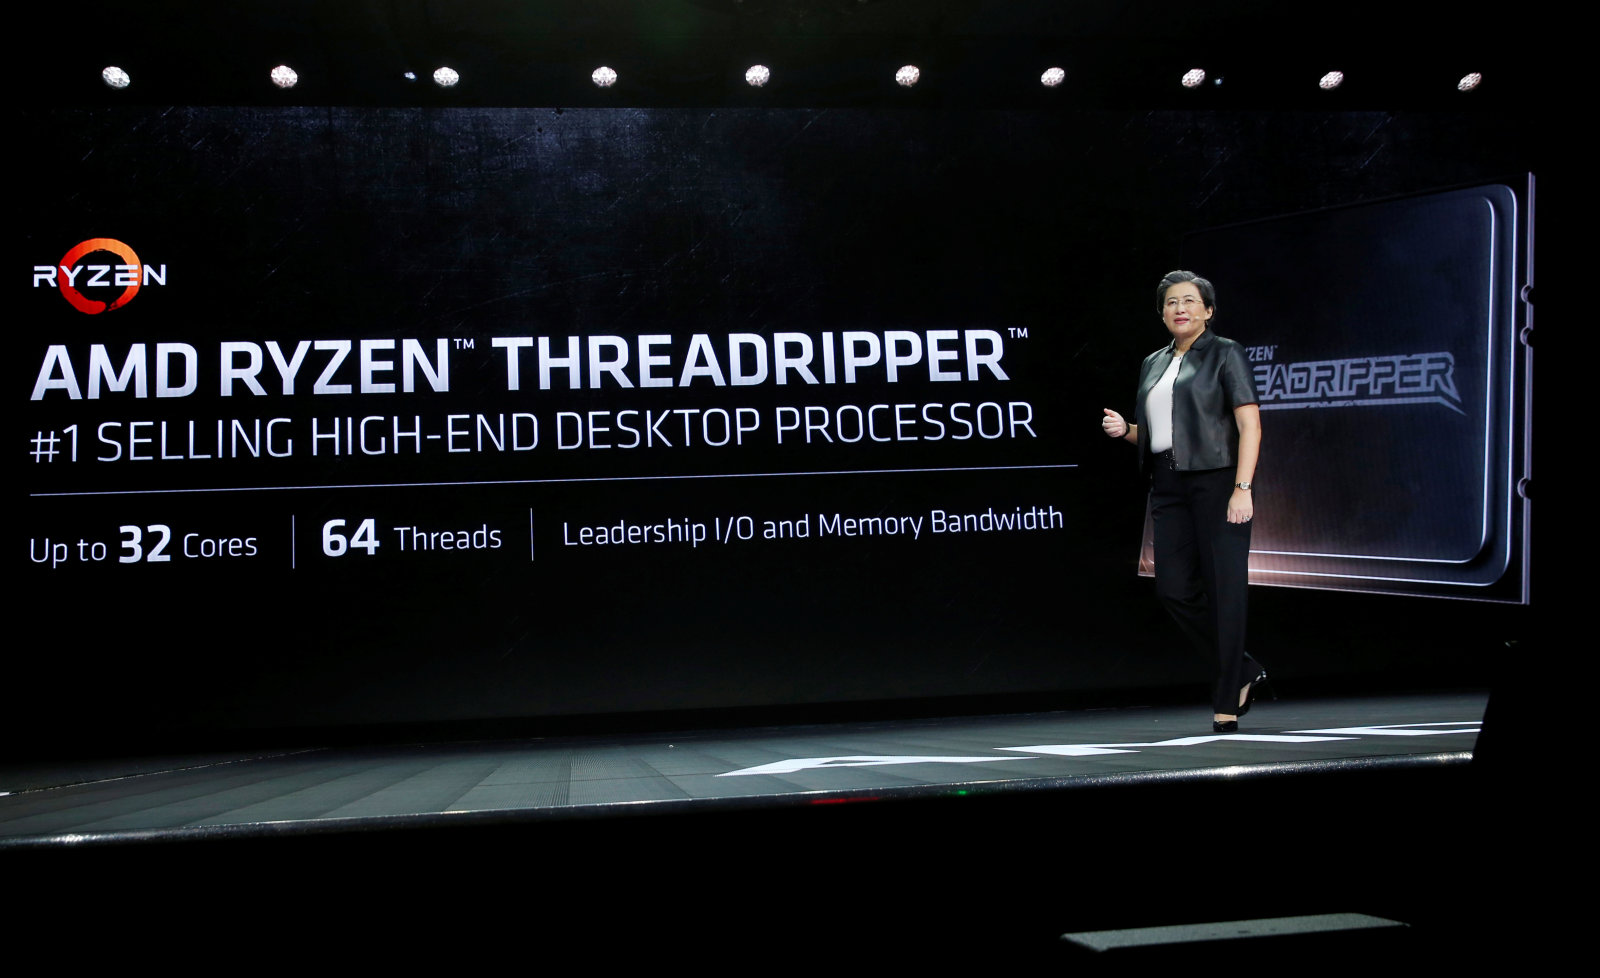 Lisa Su, president and CEO of AMD, talks about the AMD Ryzen Threadripper, a a high-performance processor for gamers and content developers, during the 2019 CES in Las Vegas, Nevada, U.S., January 9, 2019. REUTERS/Steve Marcus